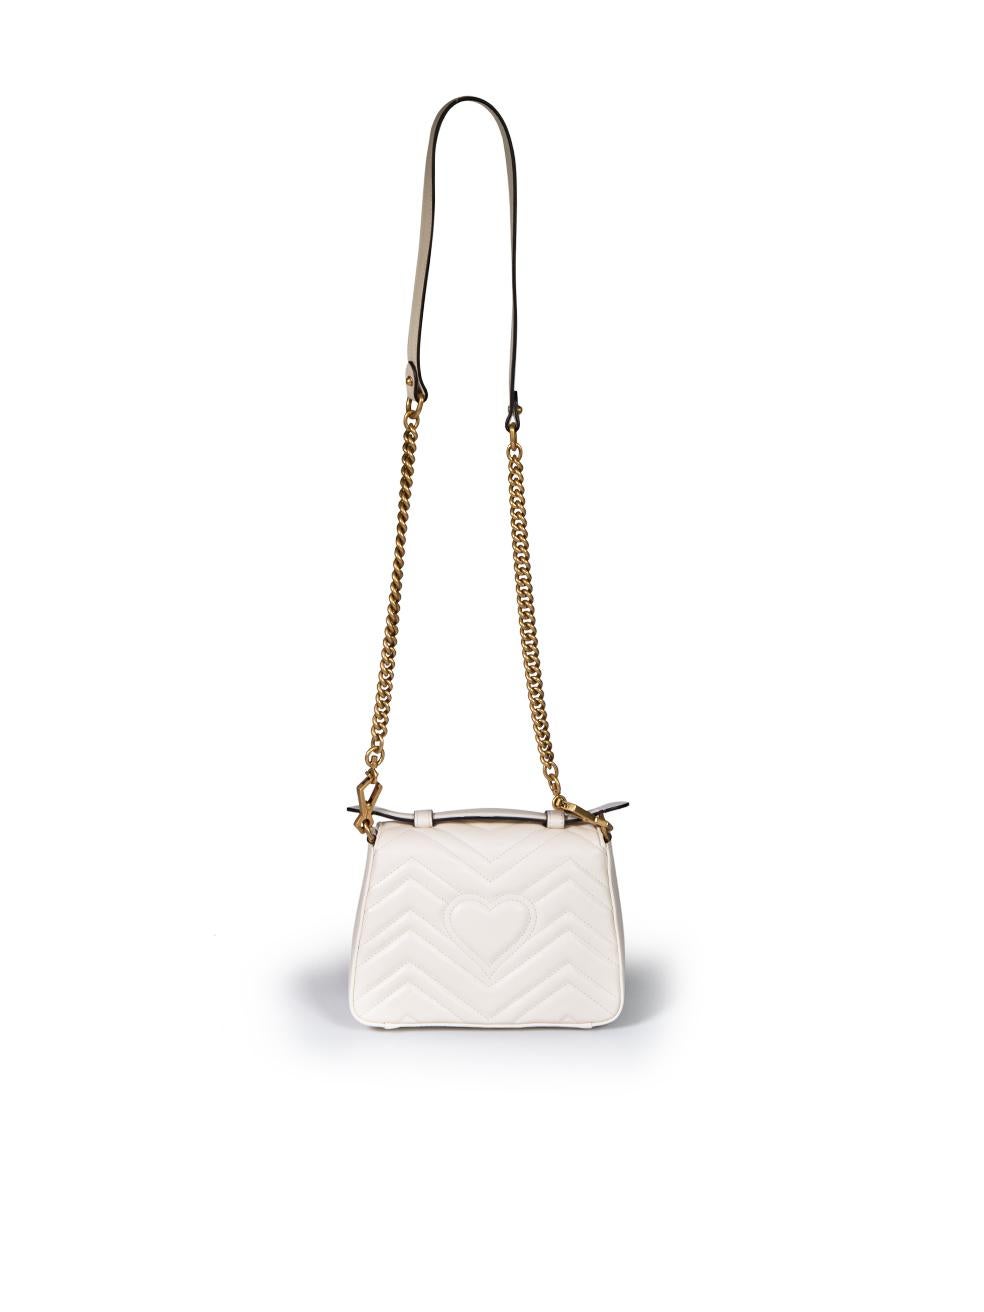 Gucci White Leather Matelasse Mini GG Marmont Top Handle Bag In New Condition For Sale In London, GB